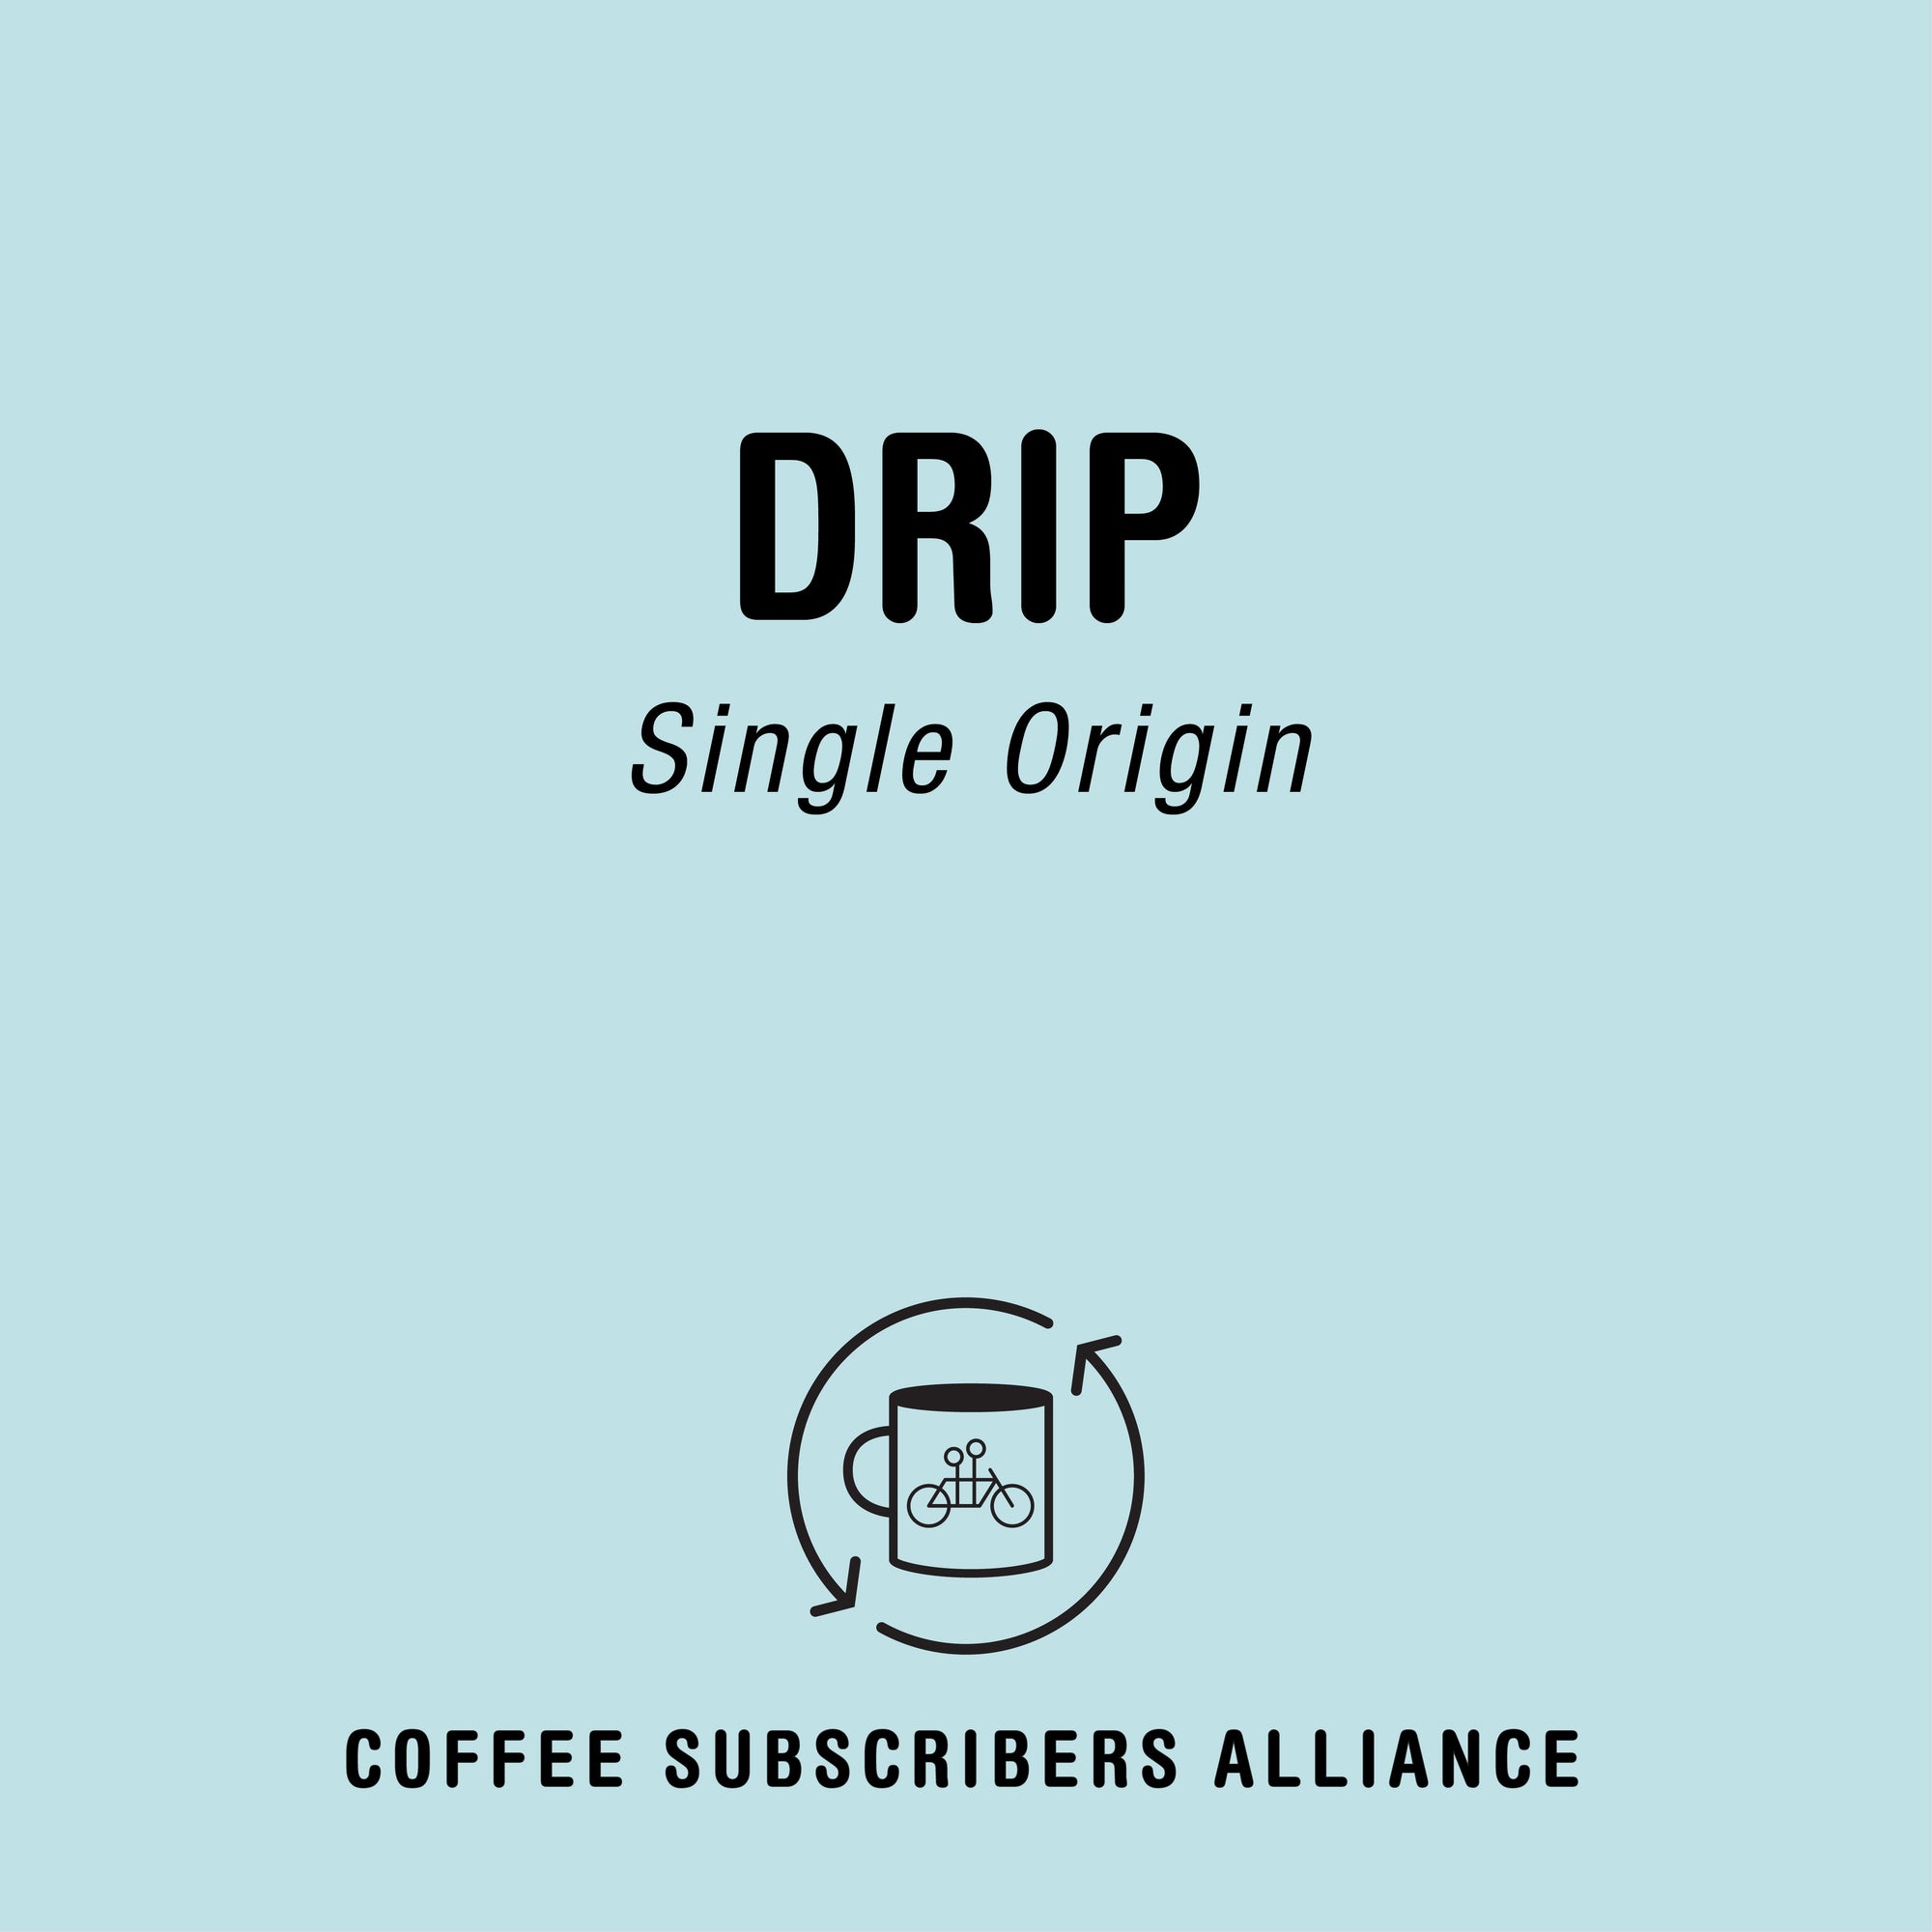 Logo of "Tandem Drip Subscription Gift - 1 Week x 12," featuring a coffee cup encircled with the text "coffee subscribers alliance" on a light blue background.